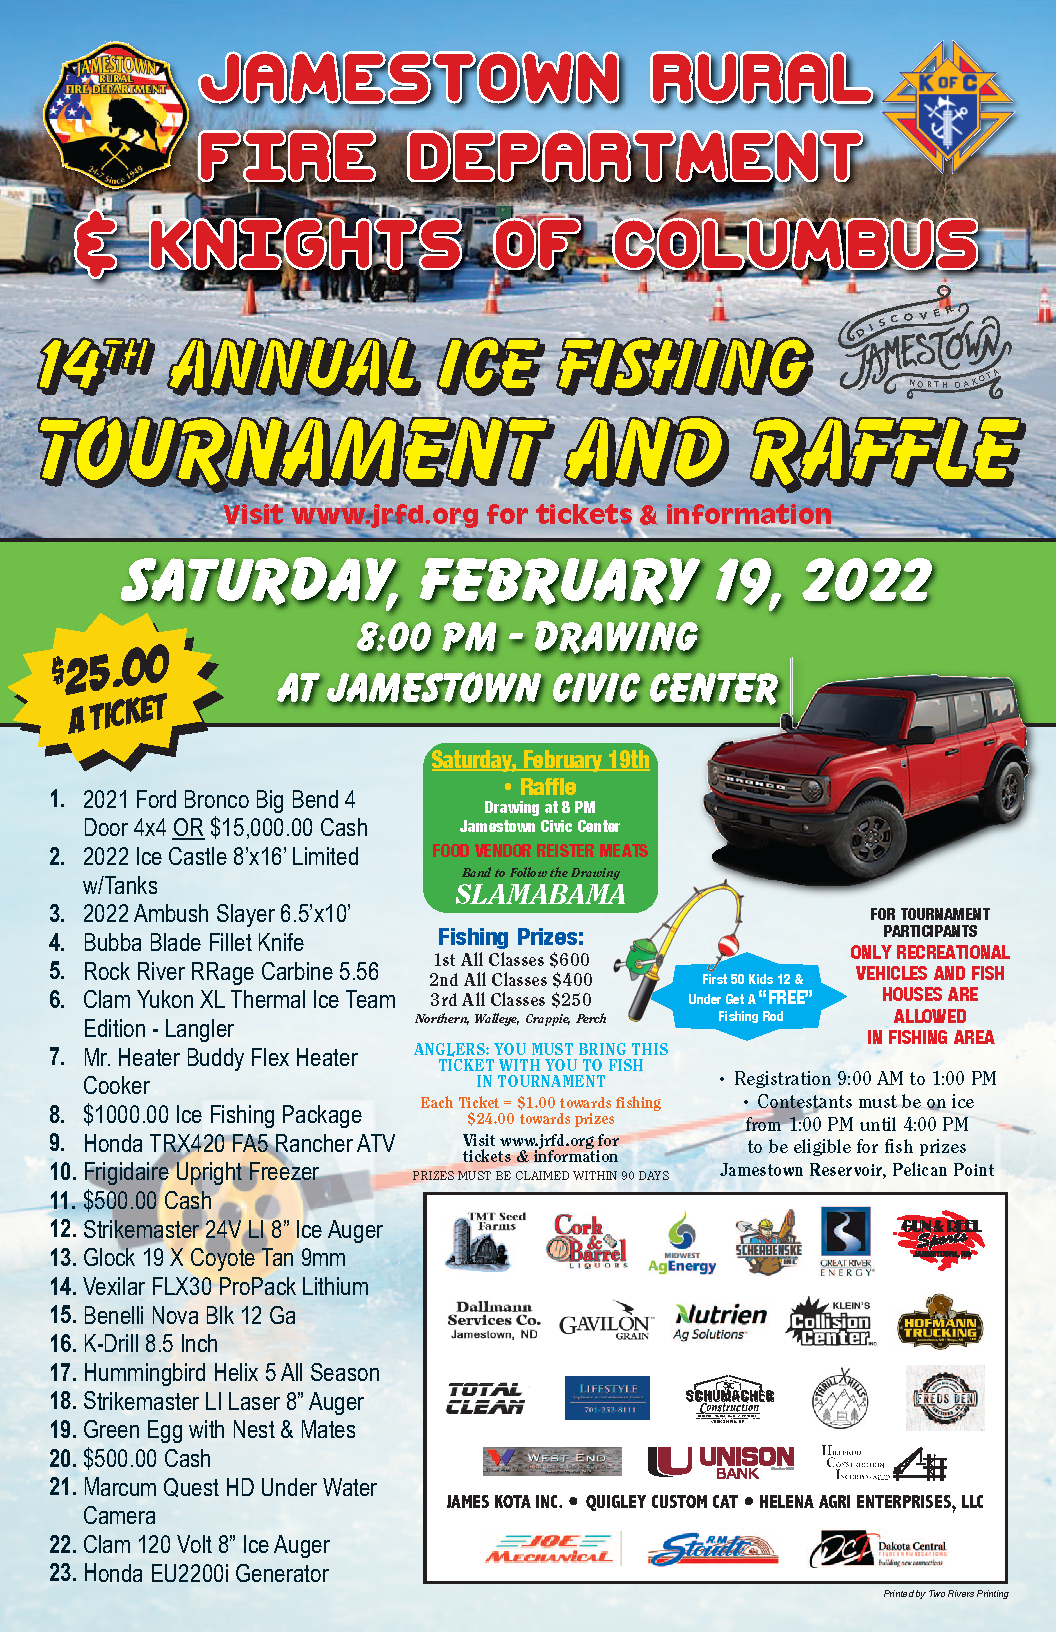 2022 Fishing Derby Ticket Availability Jamestown Rural Fire Department